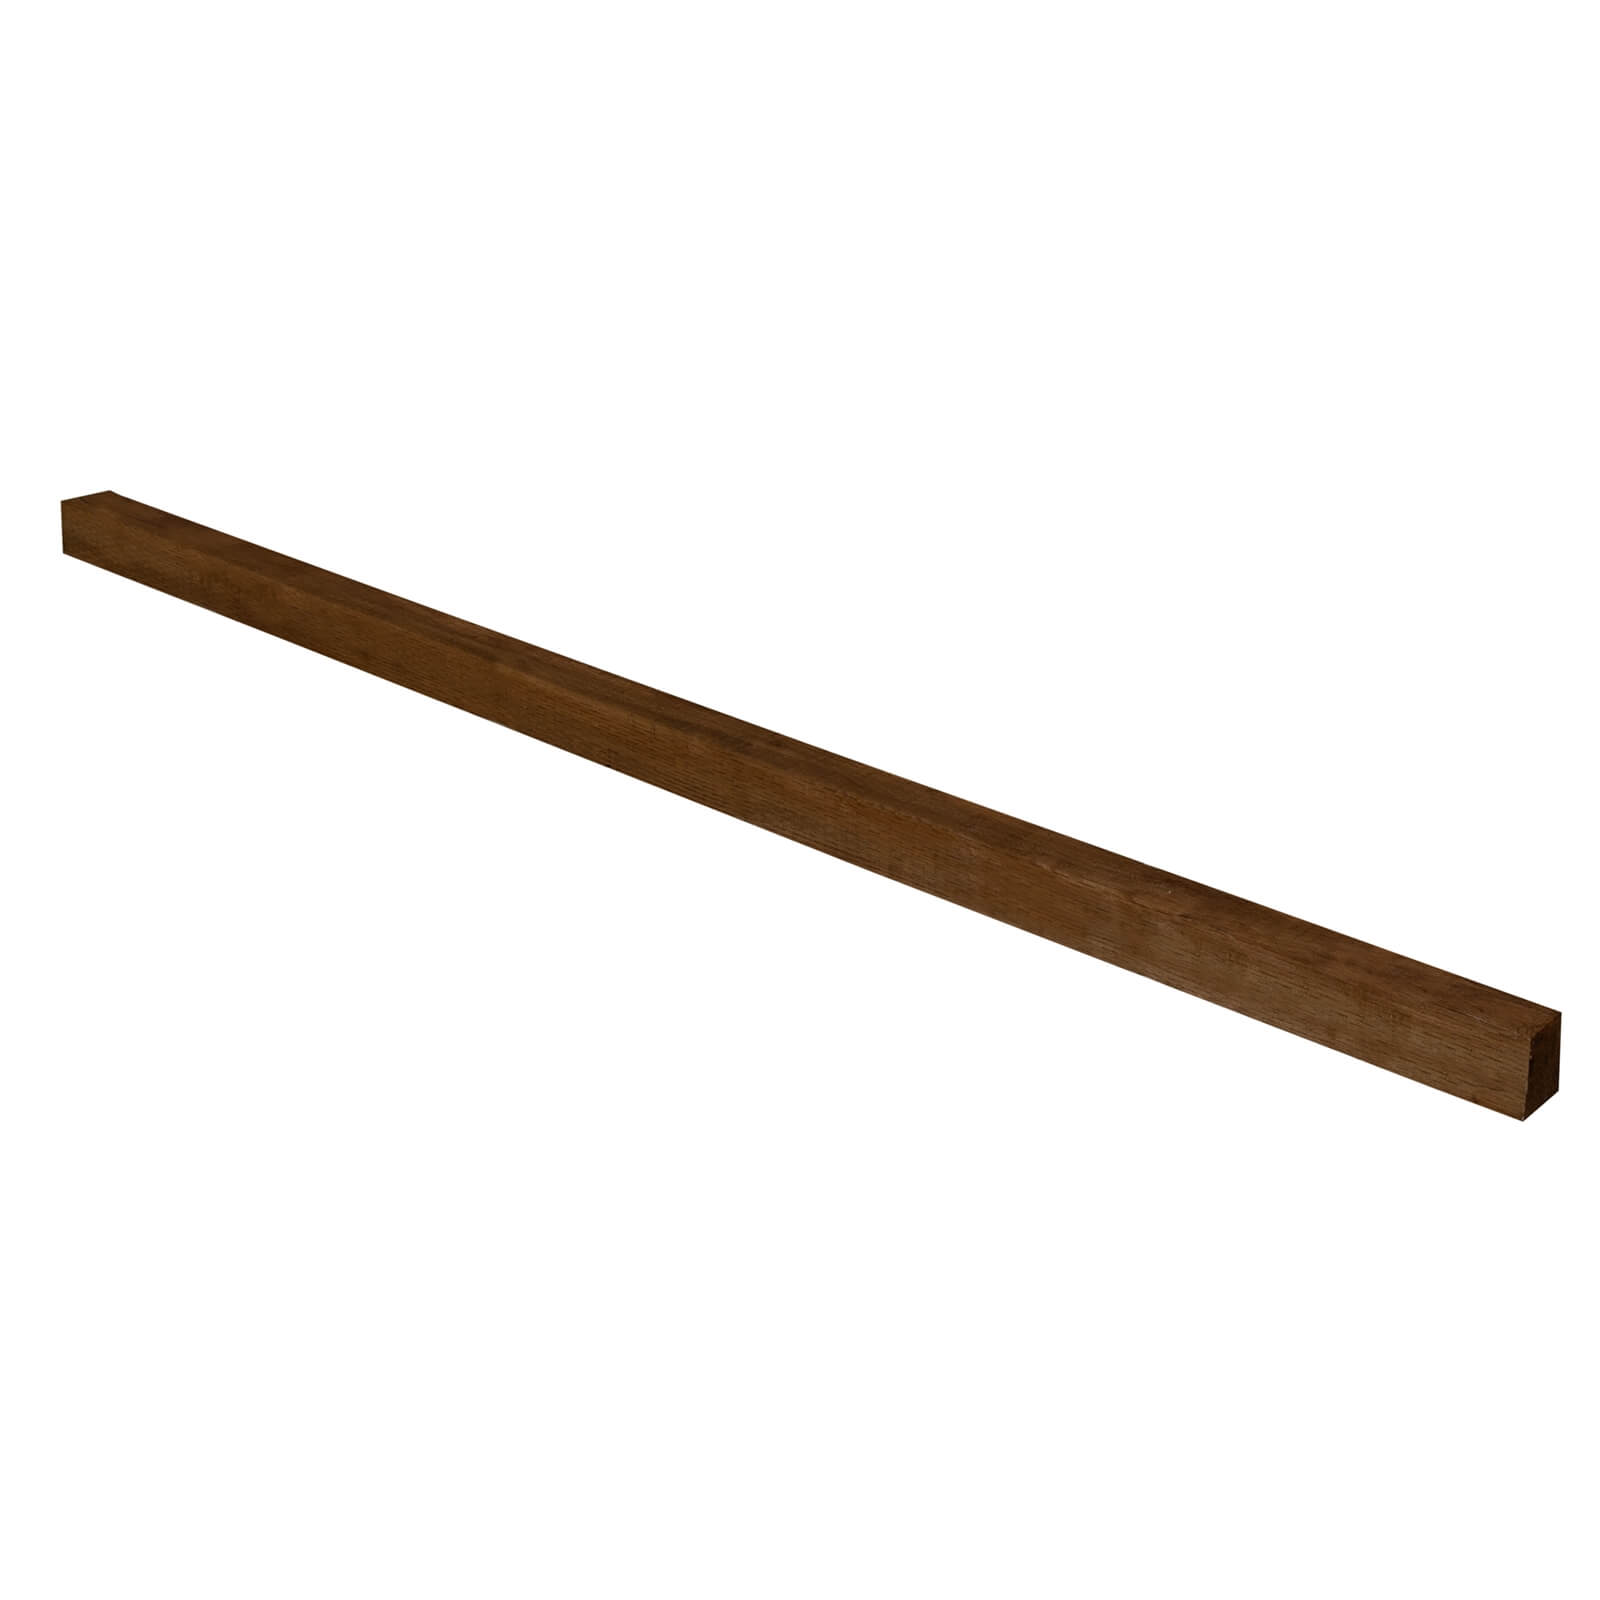 Brown Incised Fence Post 2.4m (2400 x 75 x 75mm) - Pack of 5